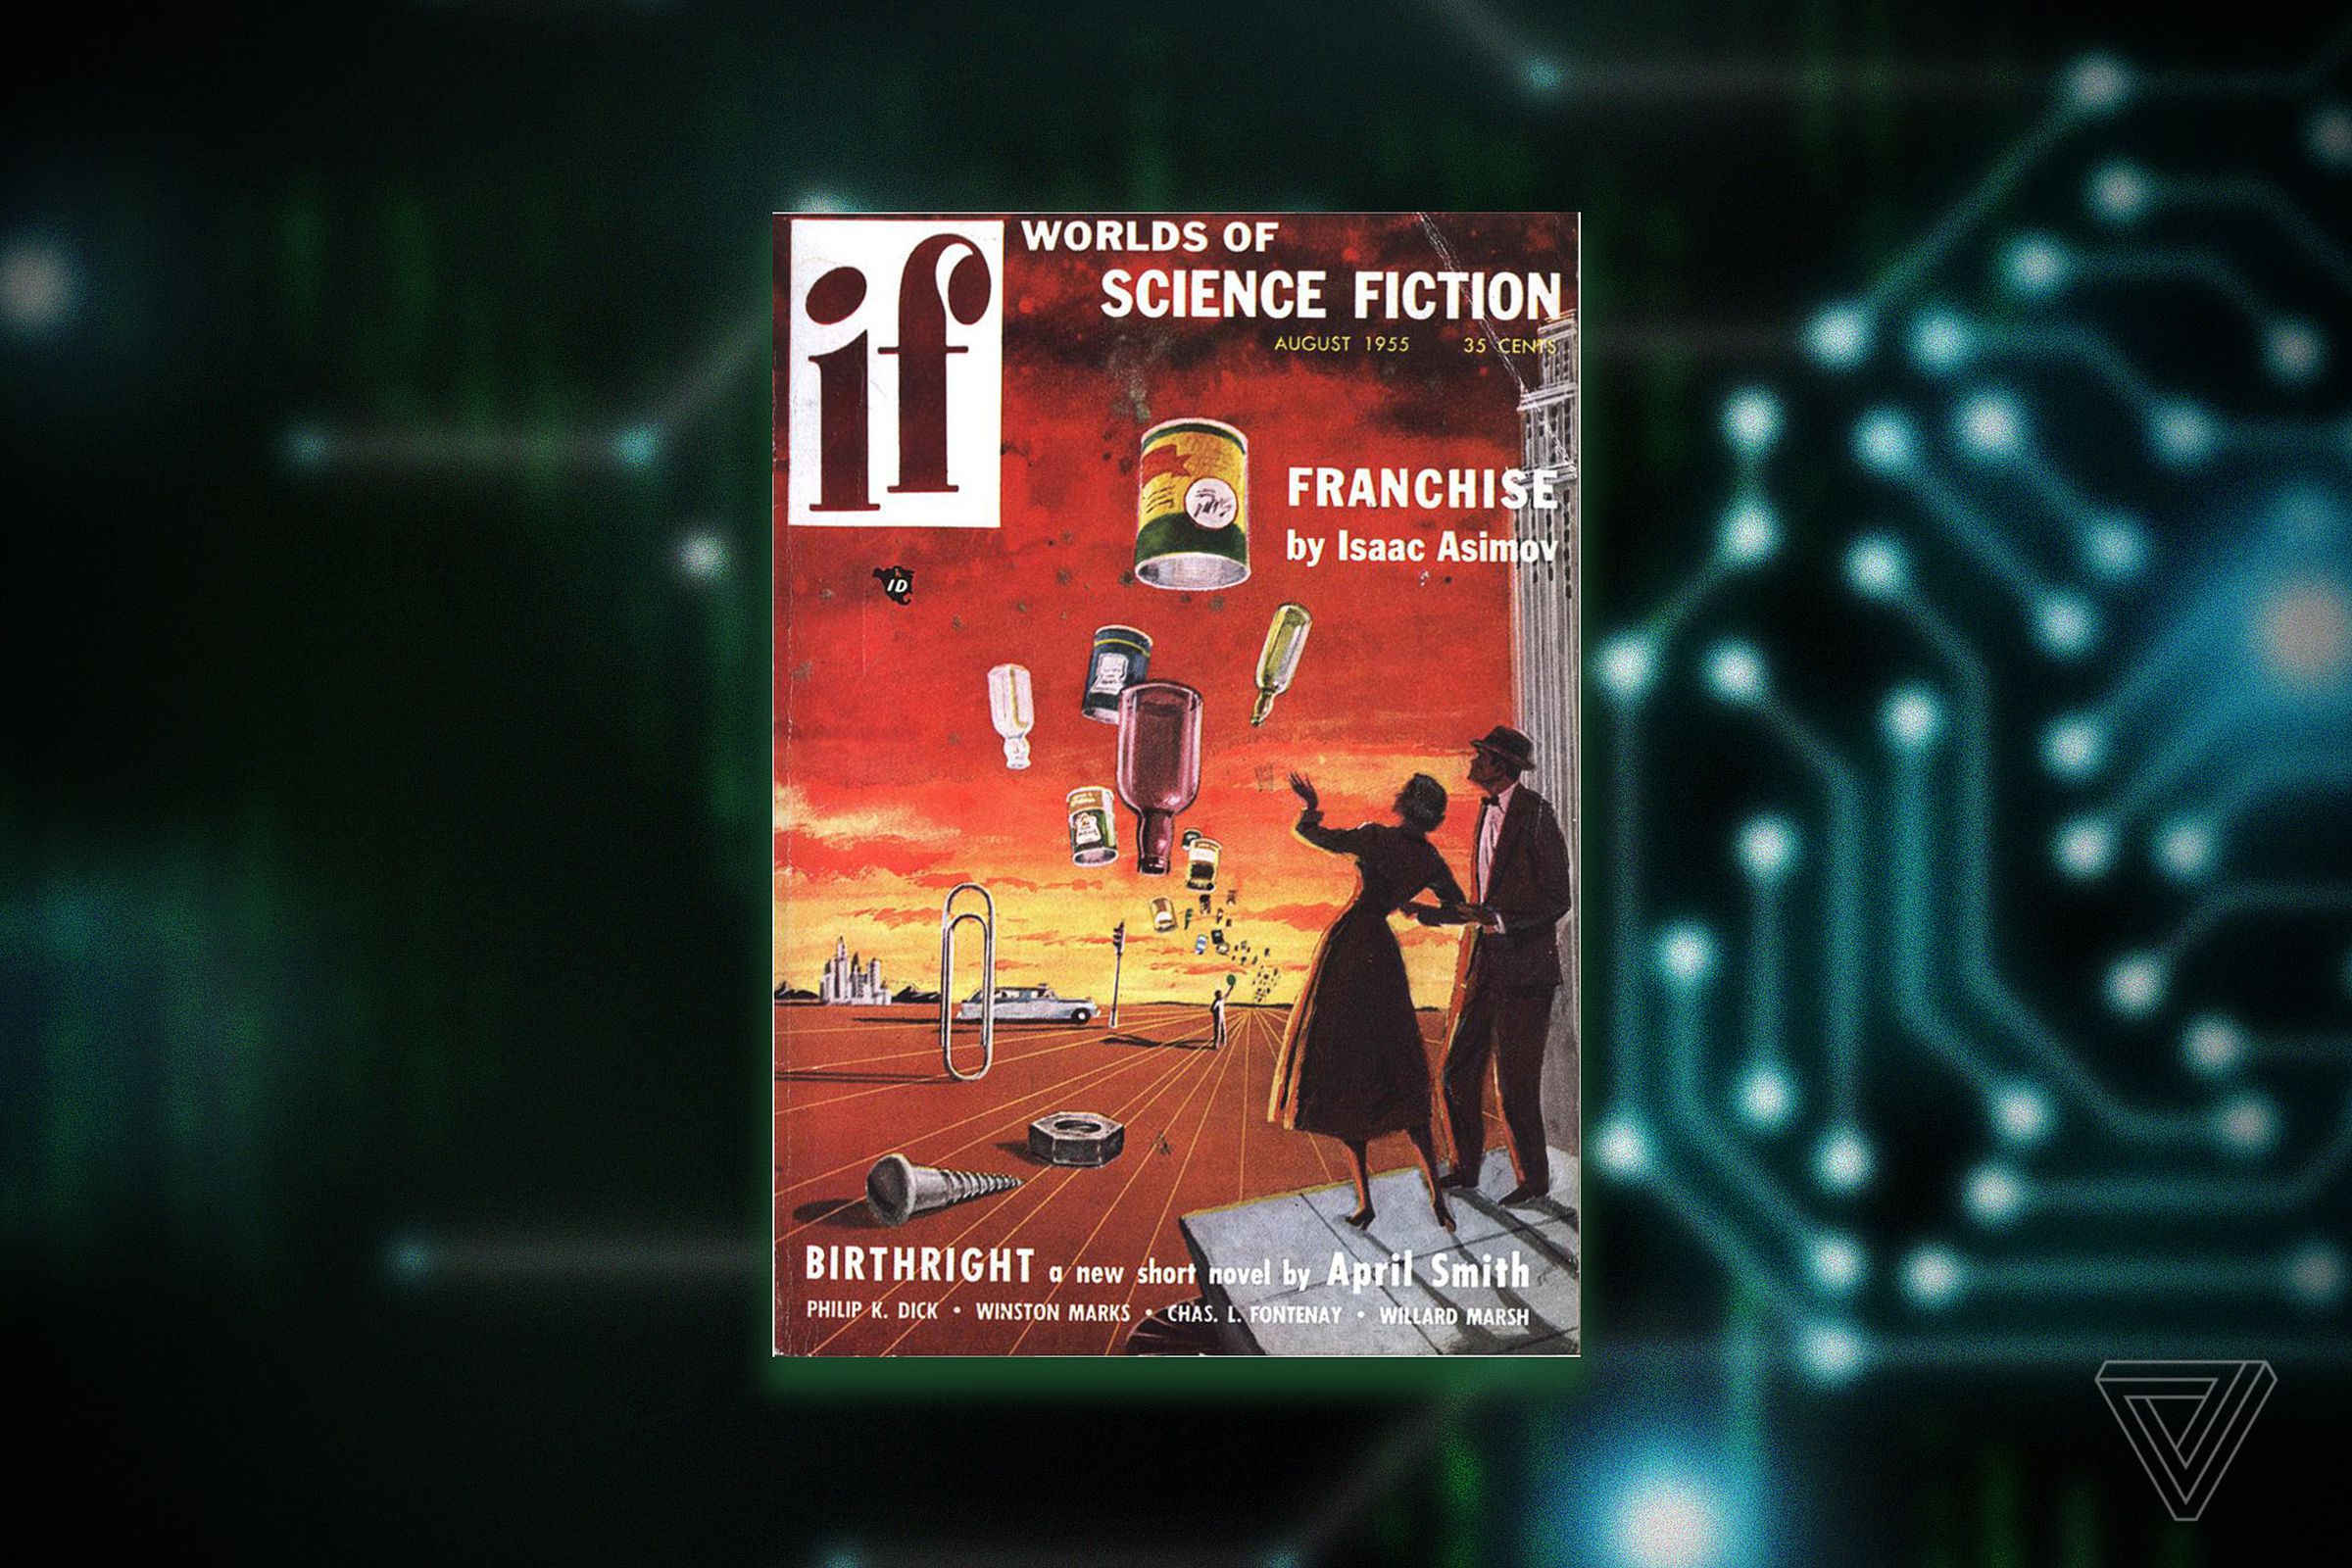 “Franchise,” from If magazine, by Isaac Asimov 